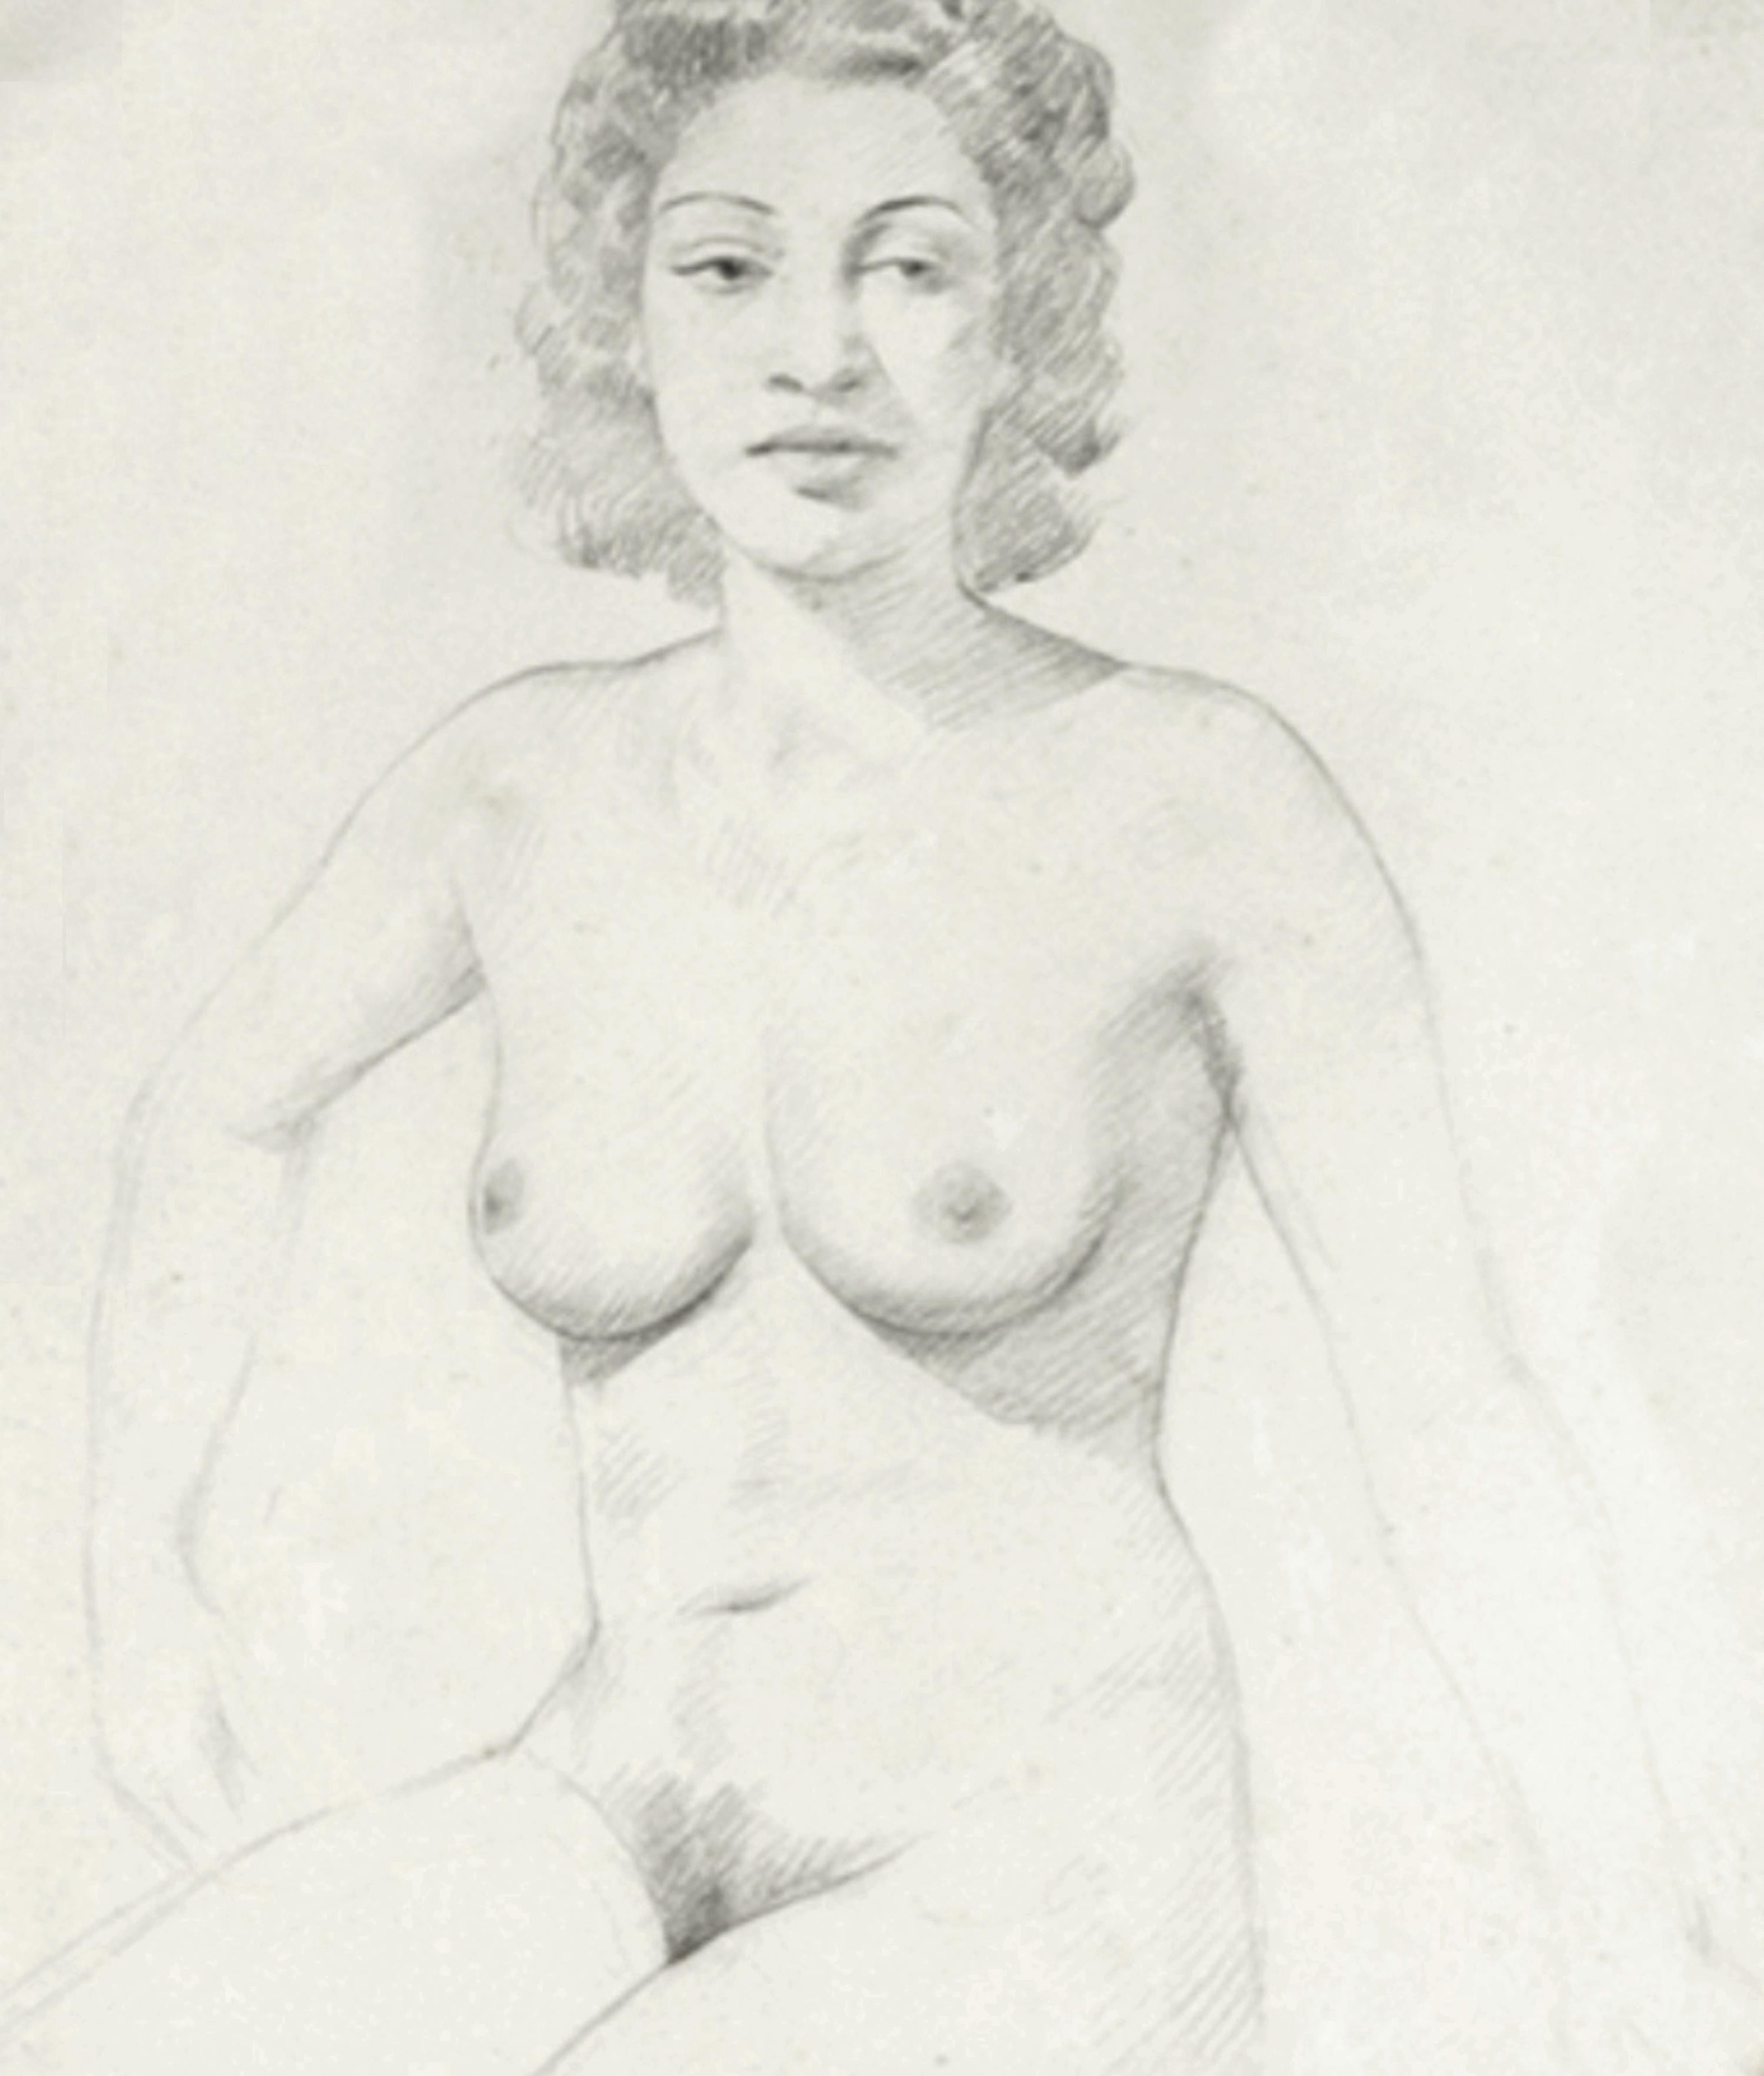 A framed charcoal drawing of a female nude dated «1941» and signed «Henrique Medina», frame 57 x 64 cm and paper 44,5 x 61,5 cm

Henrique Medina de Barros, considered one of the greatest portrait painter from Portugal, was born in the city of Porto